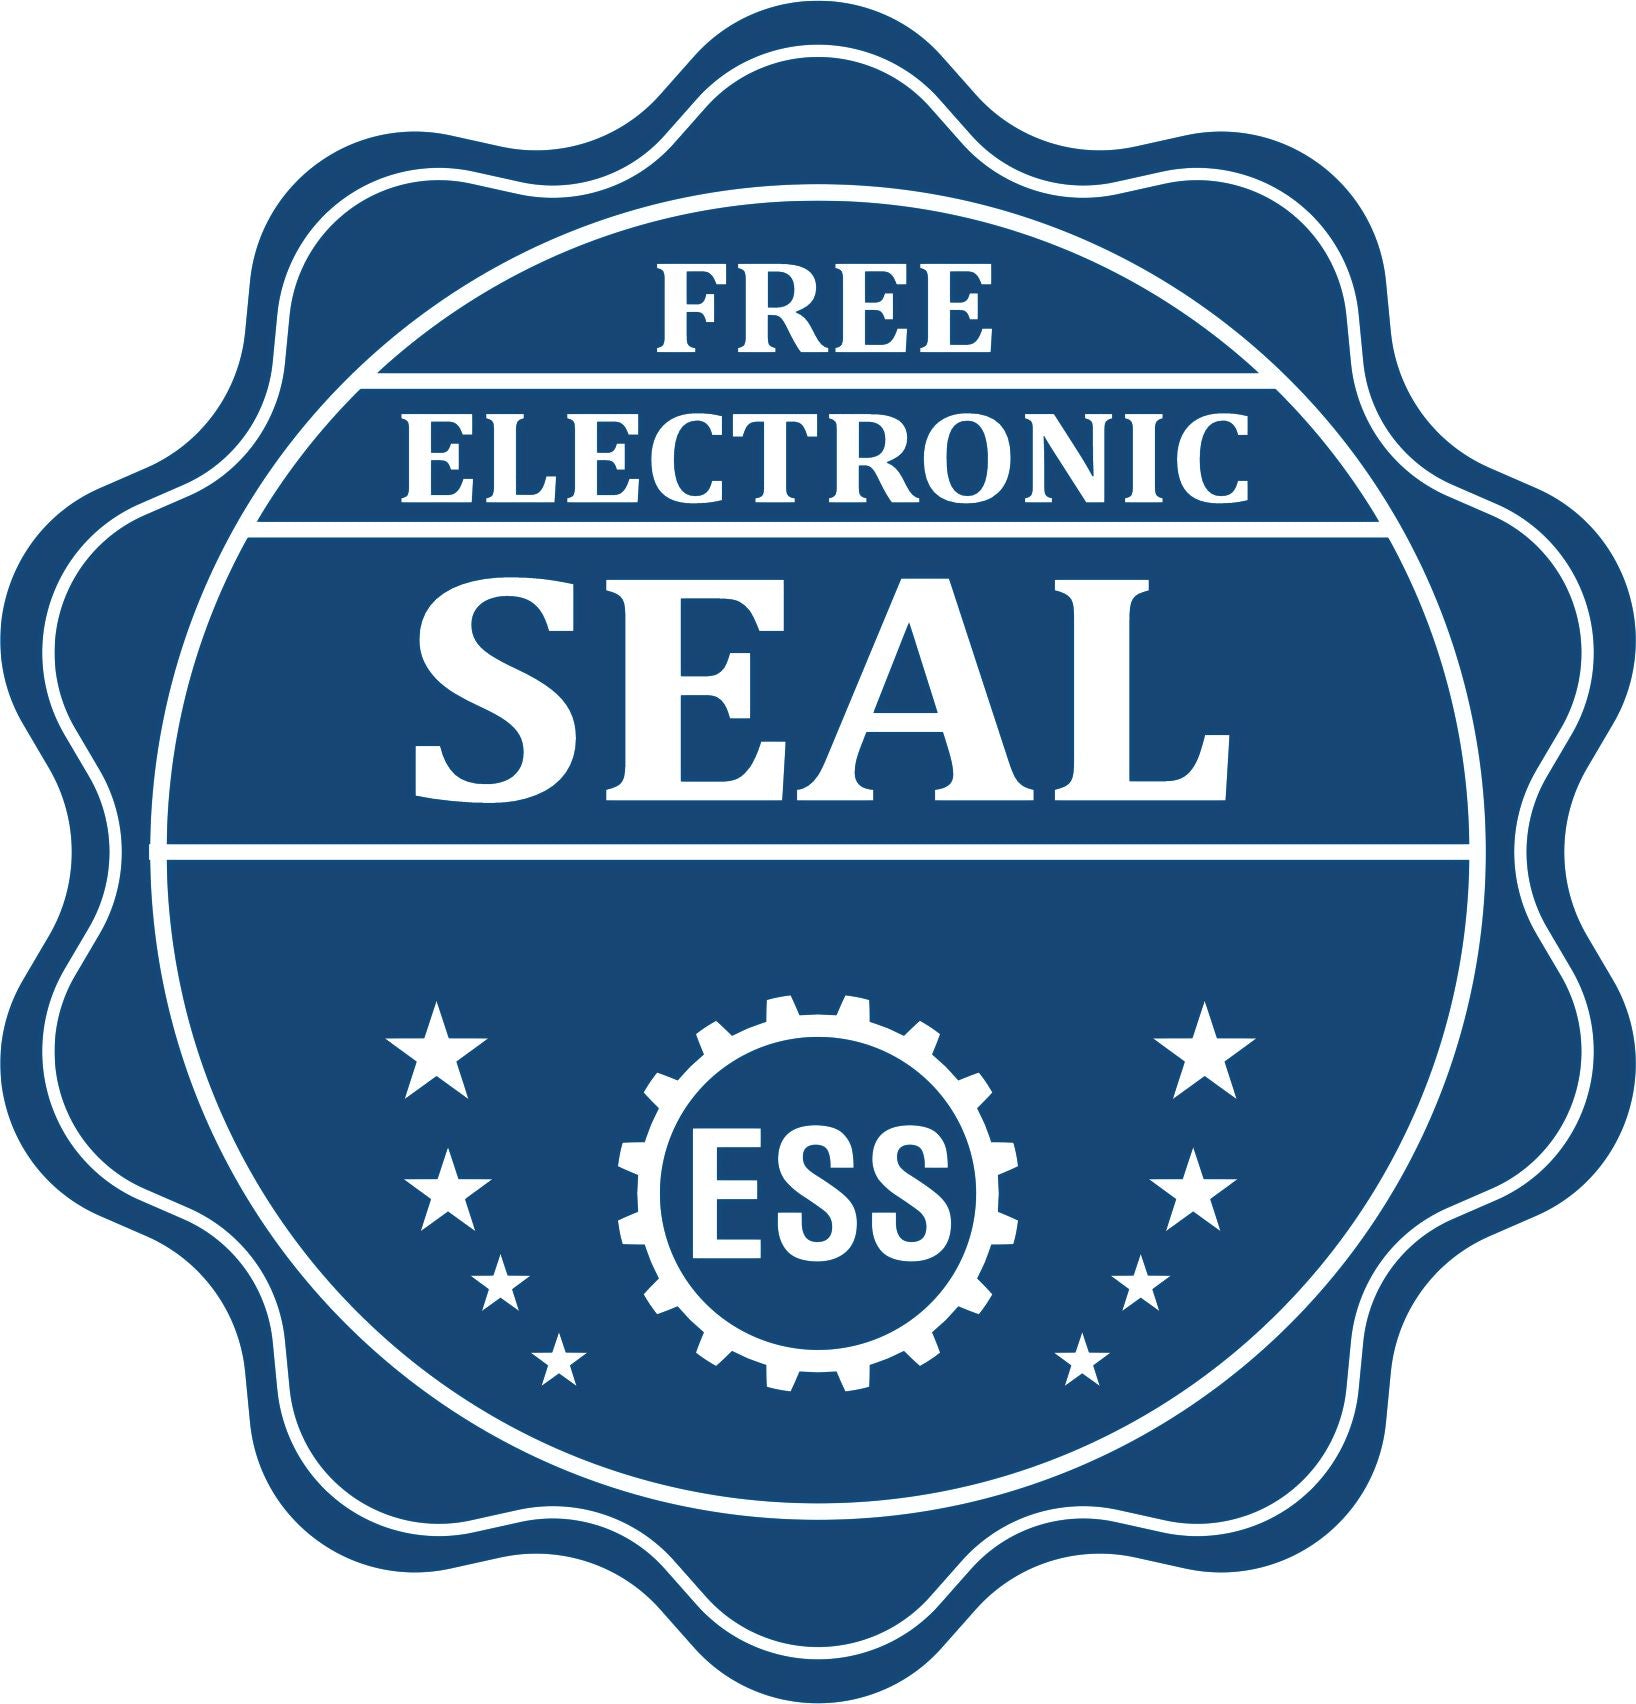 A badge showing a free electronic seal for the Long Reach Alabama Land Surveyor Seal with stars and the ESS gear on the emblem.